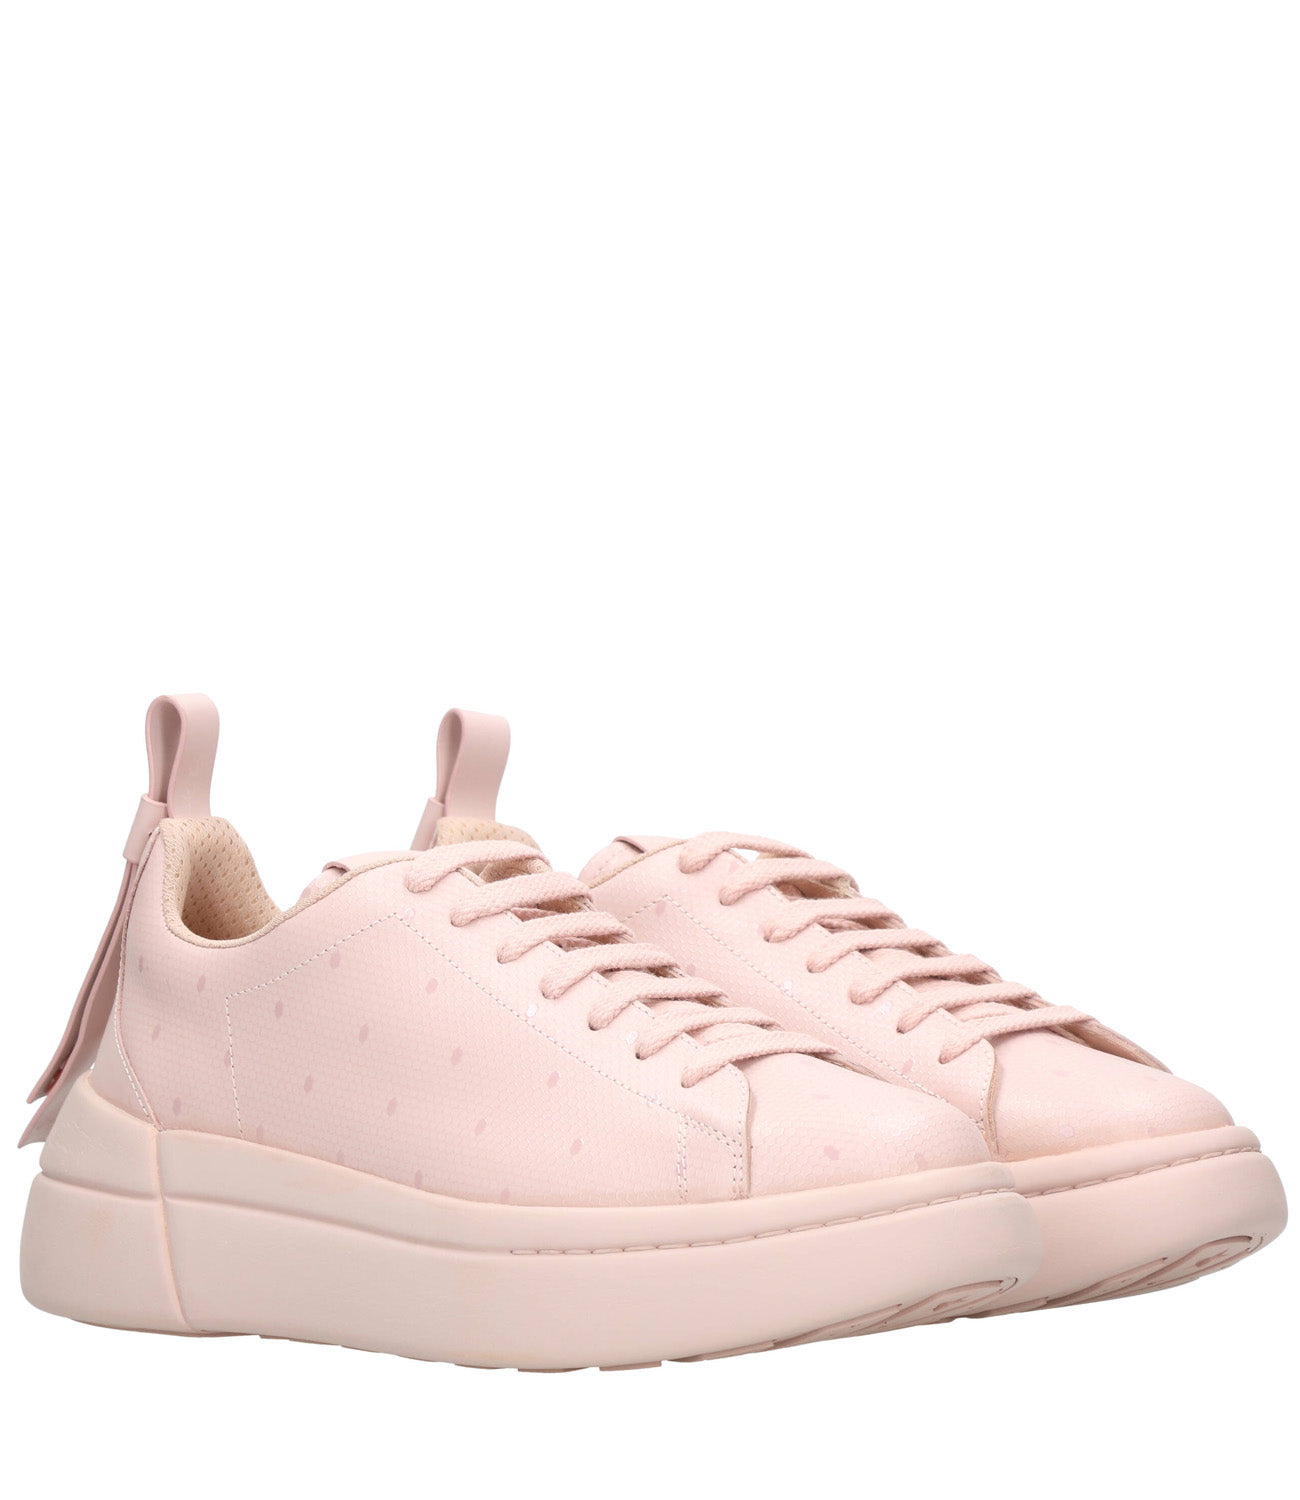 Red Valentino | Bowalk Sneakers Nude